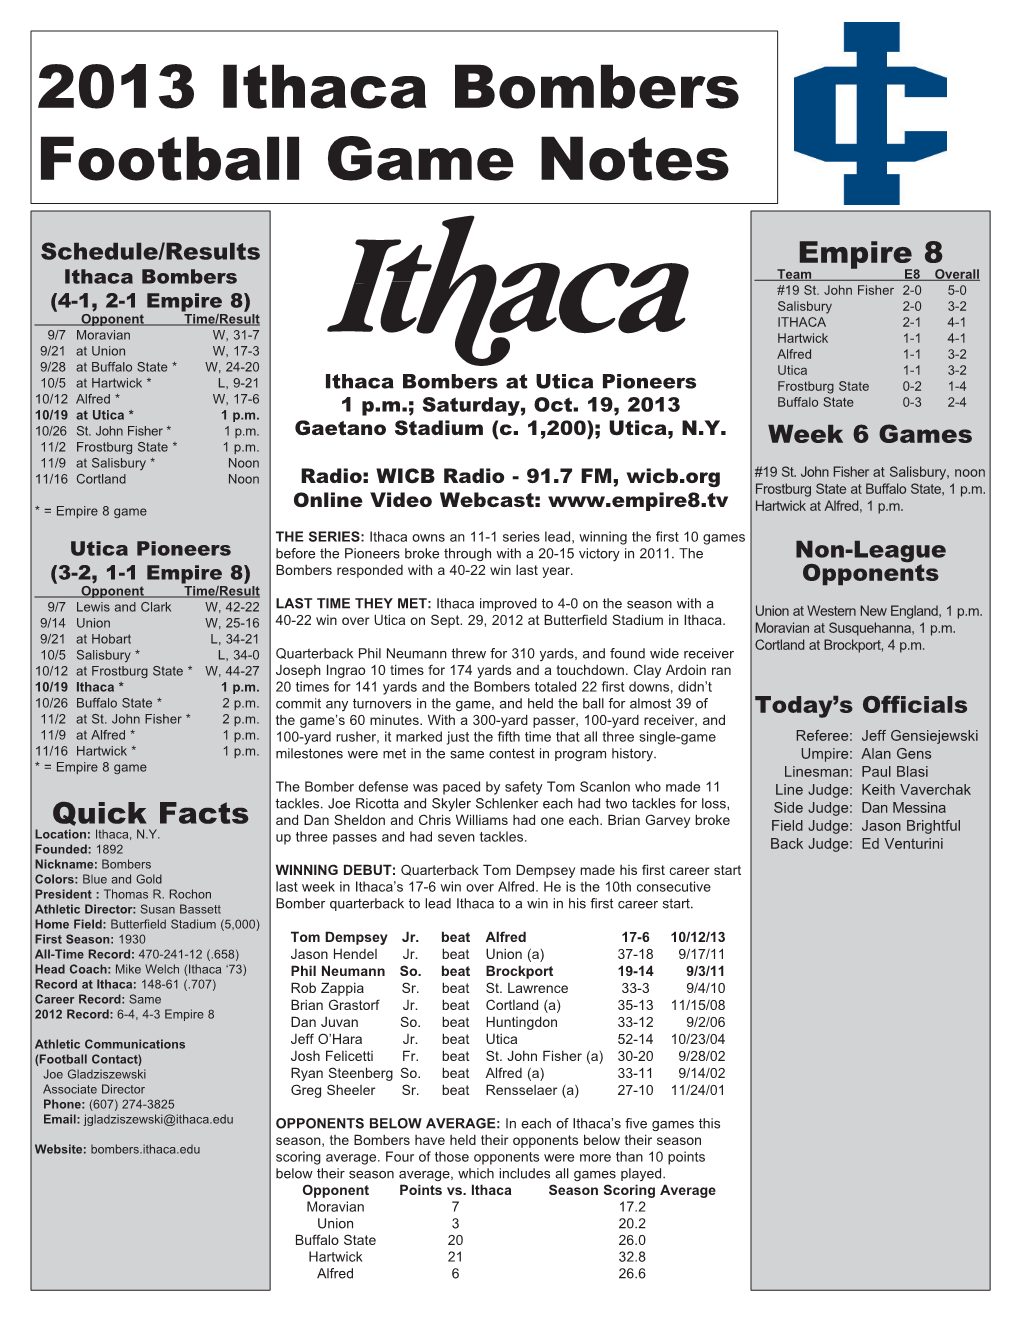 2013 Ithaca Bombers Football Game Notes